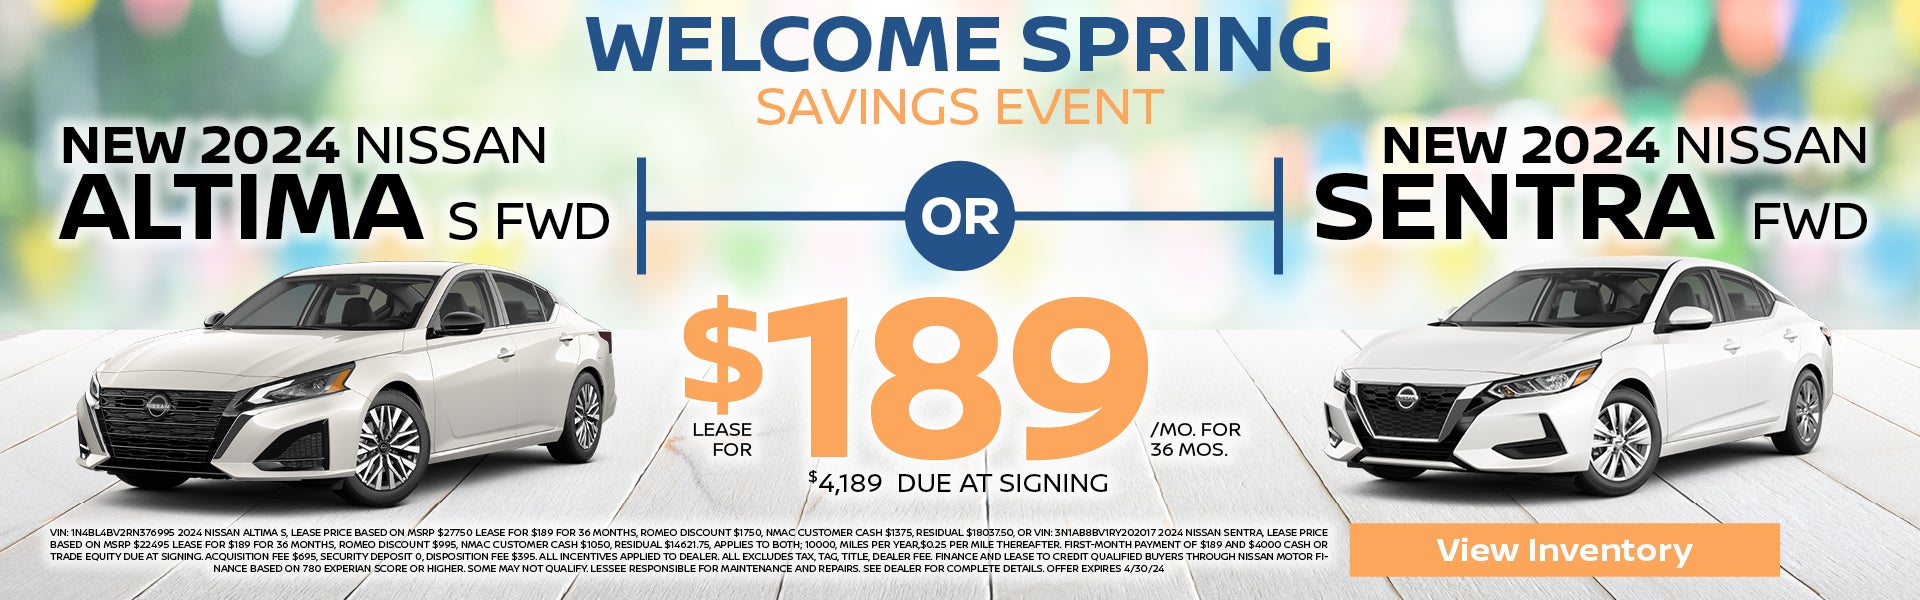 Welcome Spring Savings Event